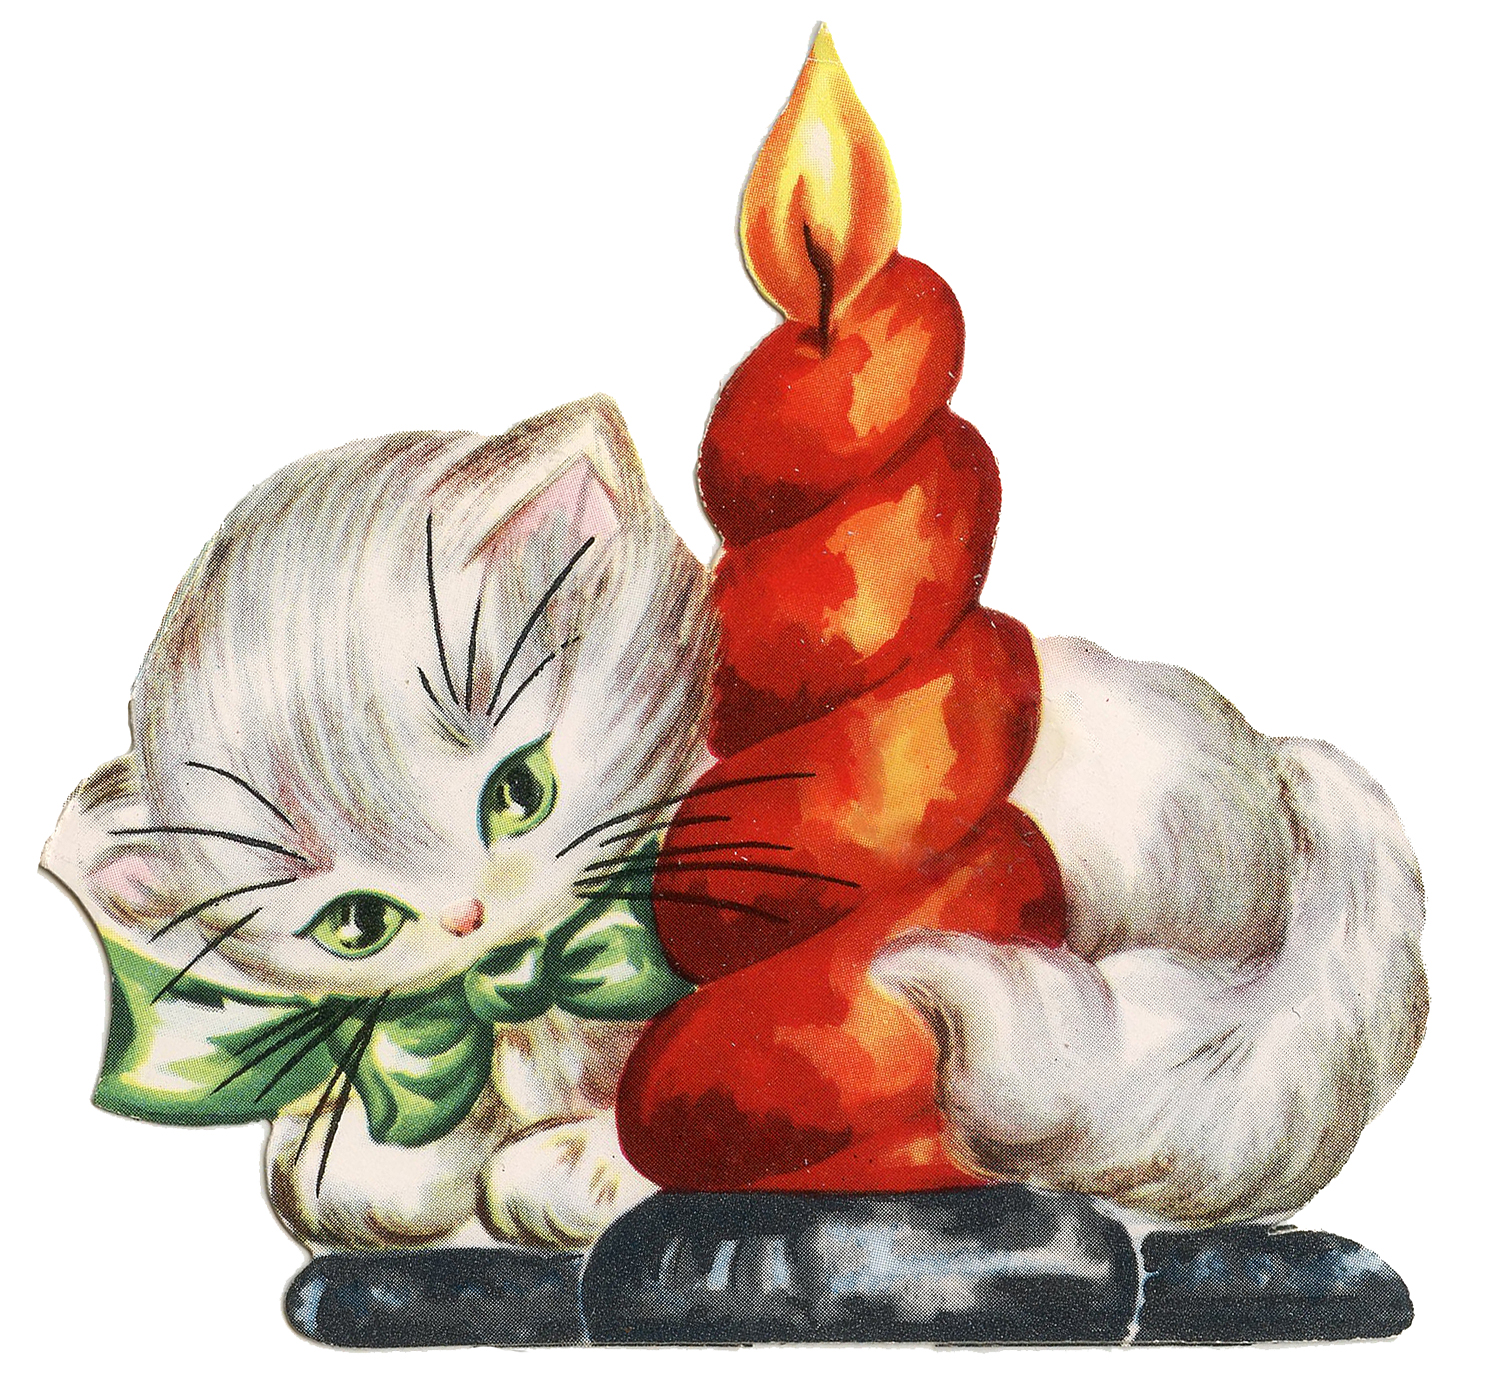 Retro Christmas Clip Art   Kitten With Candle   The Graphics Fairy